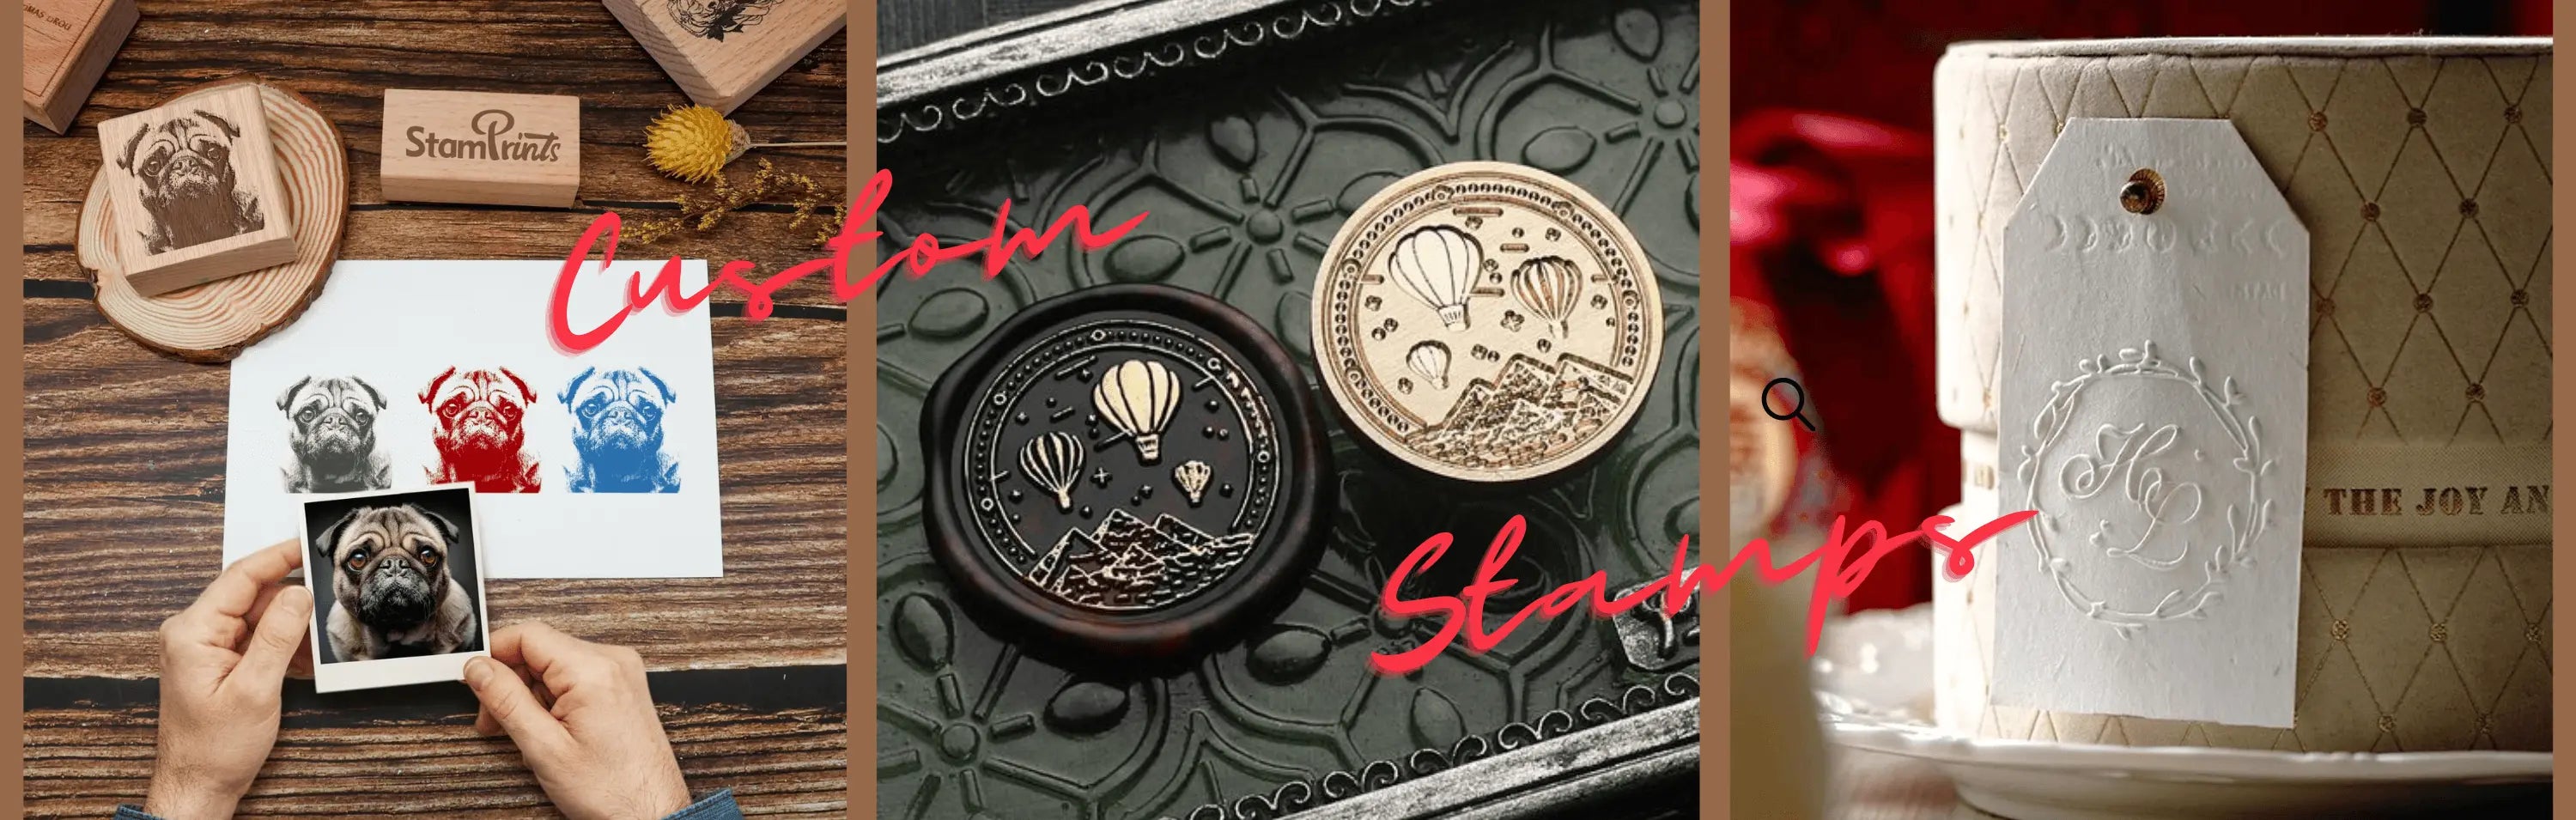 stamprints custom stamps - wax seal stamps, rubber stamps, embossers